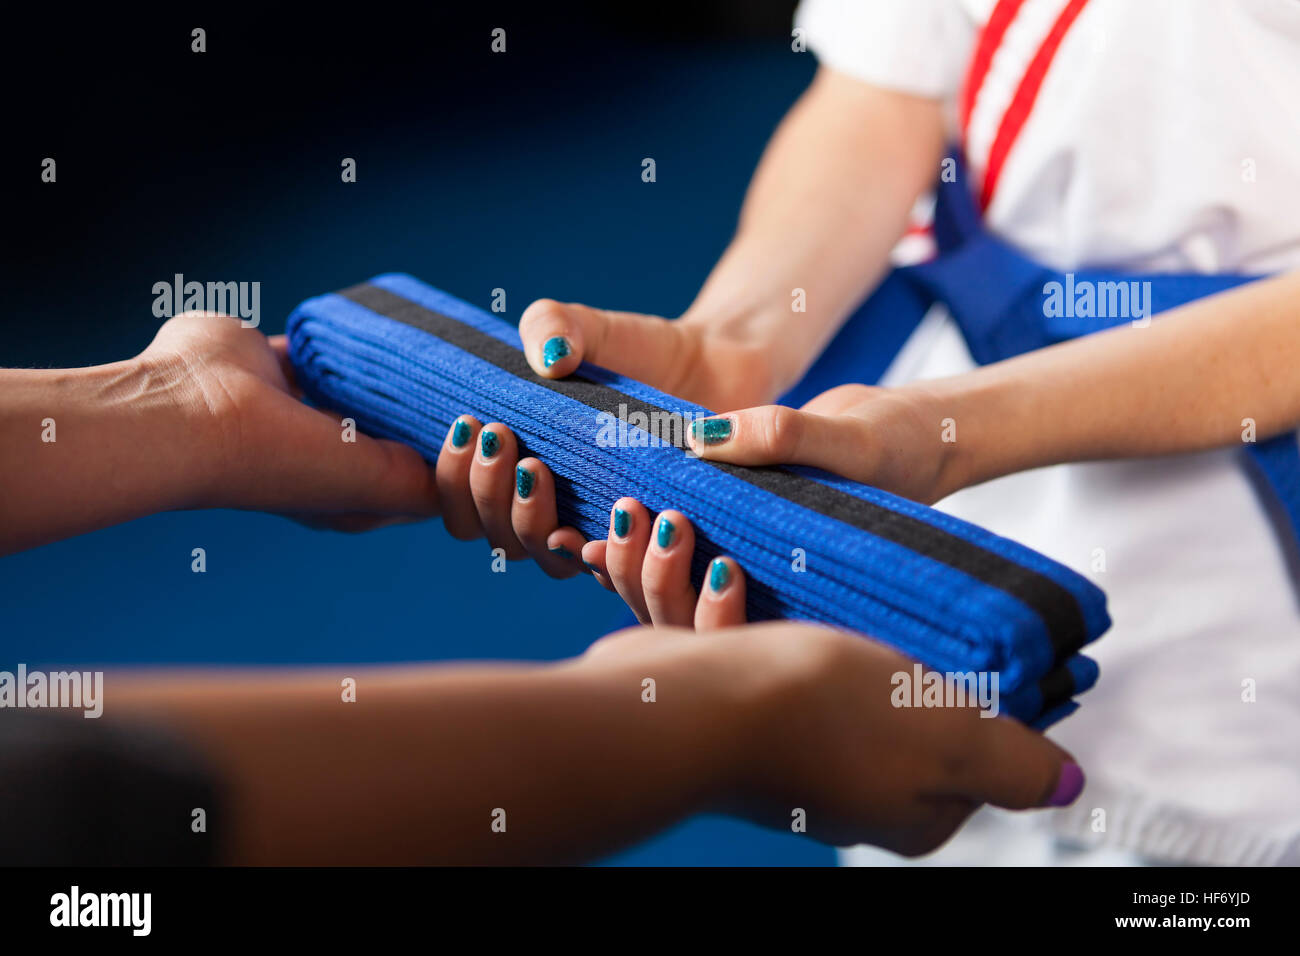 Karate Belt Promotion. Teacher handing belt to youth student. Shallow Depth of Field, focus is on the belt. Stock Photo